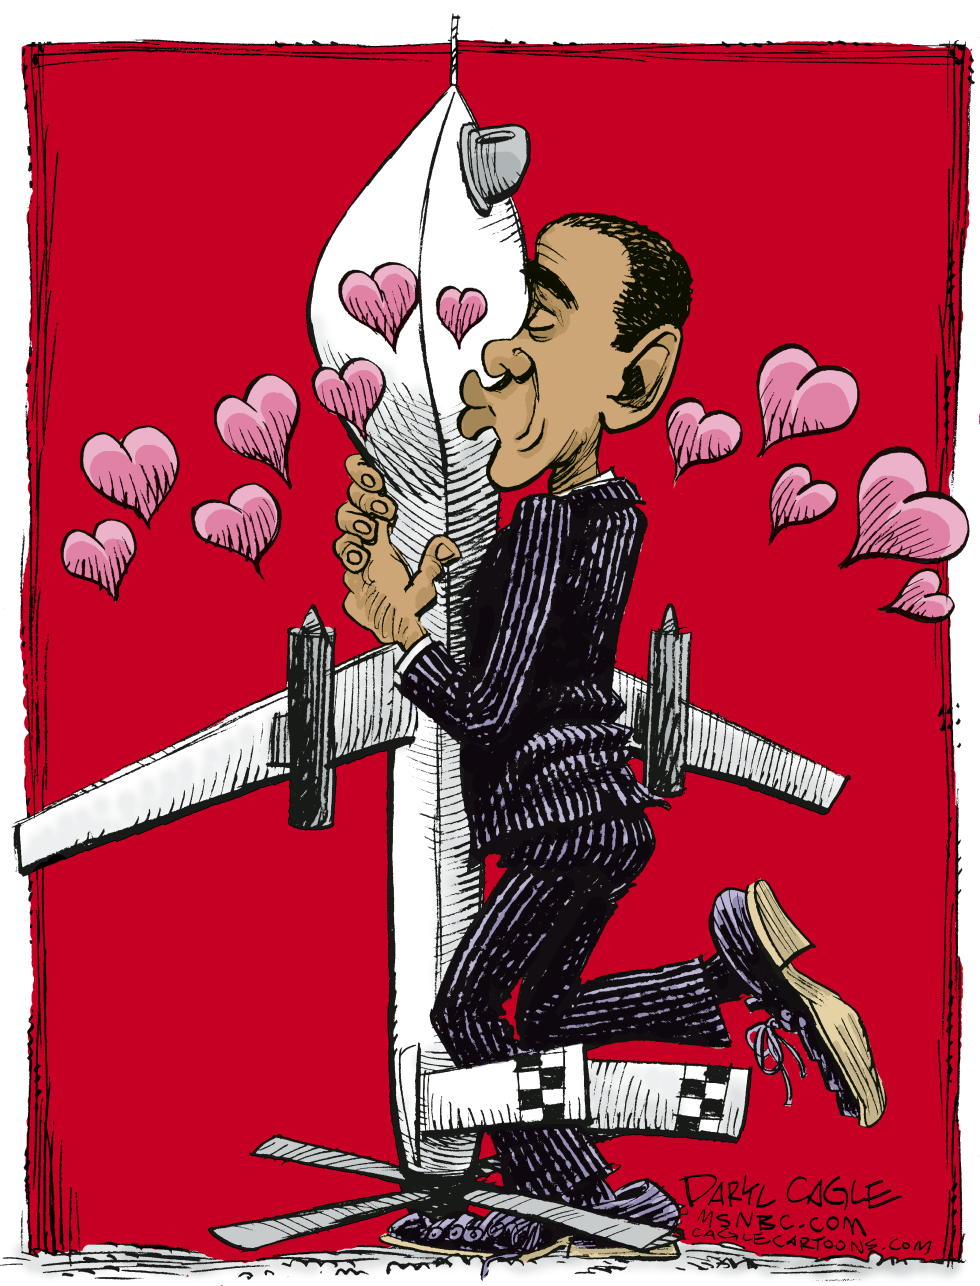  VALENTINES DAY by Daryl Cagle